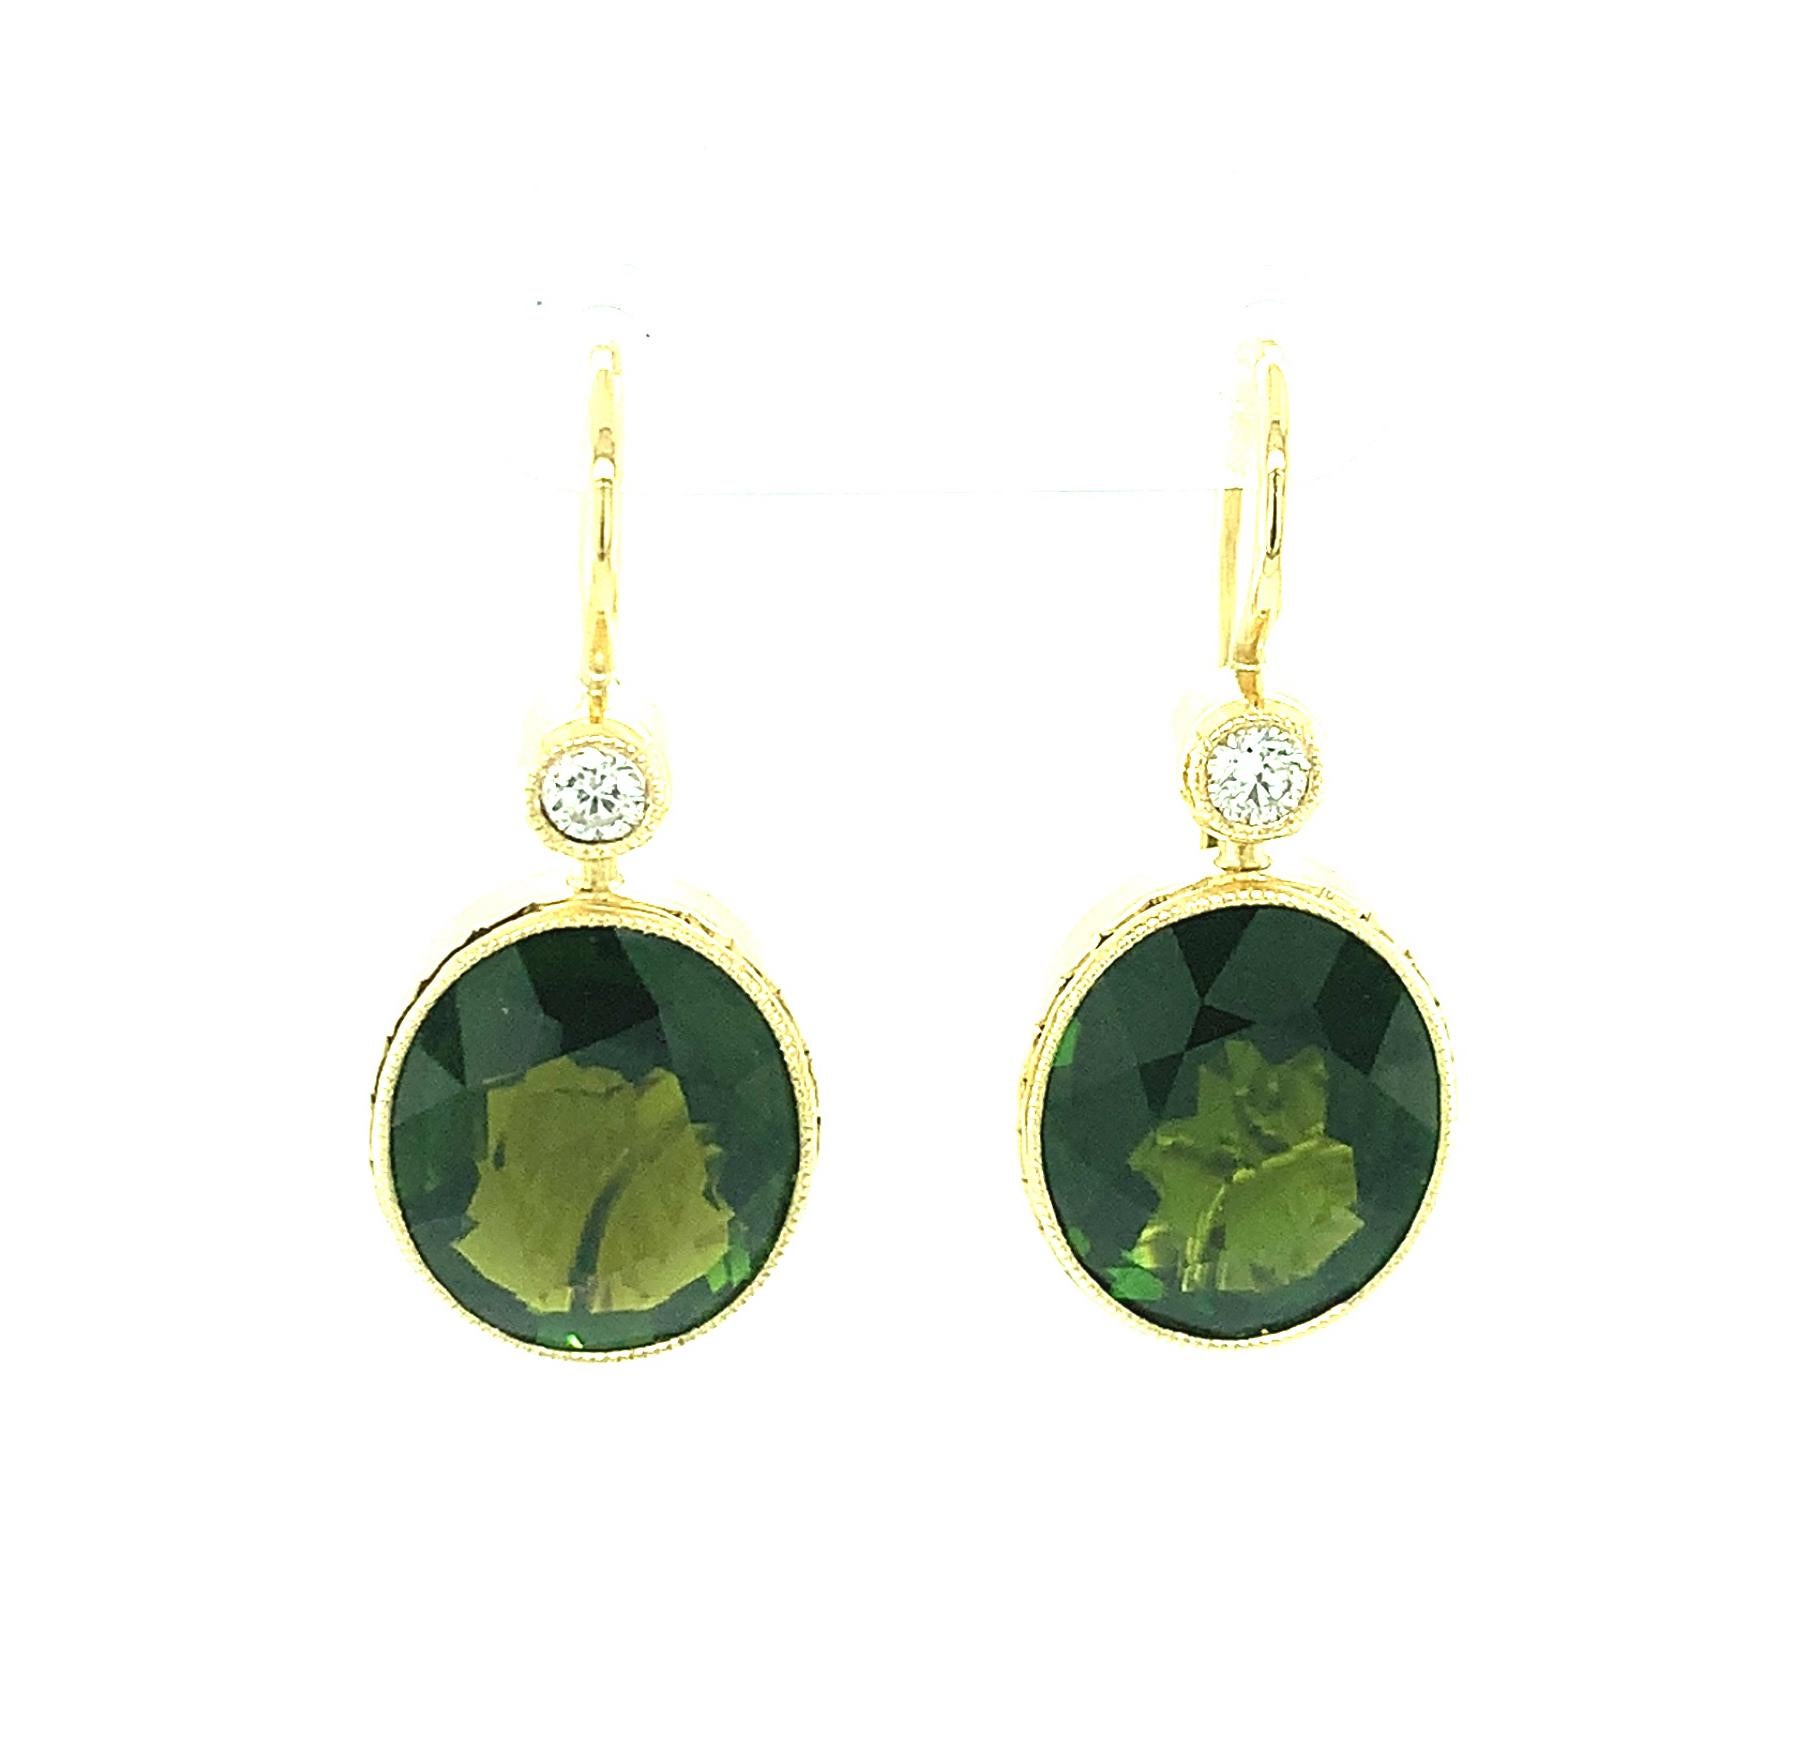 These pretty dangling earrings will add a great finishing touch to any outfit! Large, richly colored, olive green tourmaline ovals are bezel set in 18k yellow gold and dangle from bezel set round sparkling diamonds for a look that transitions